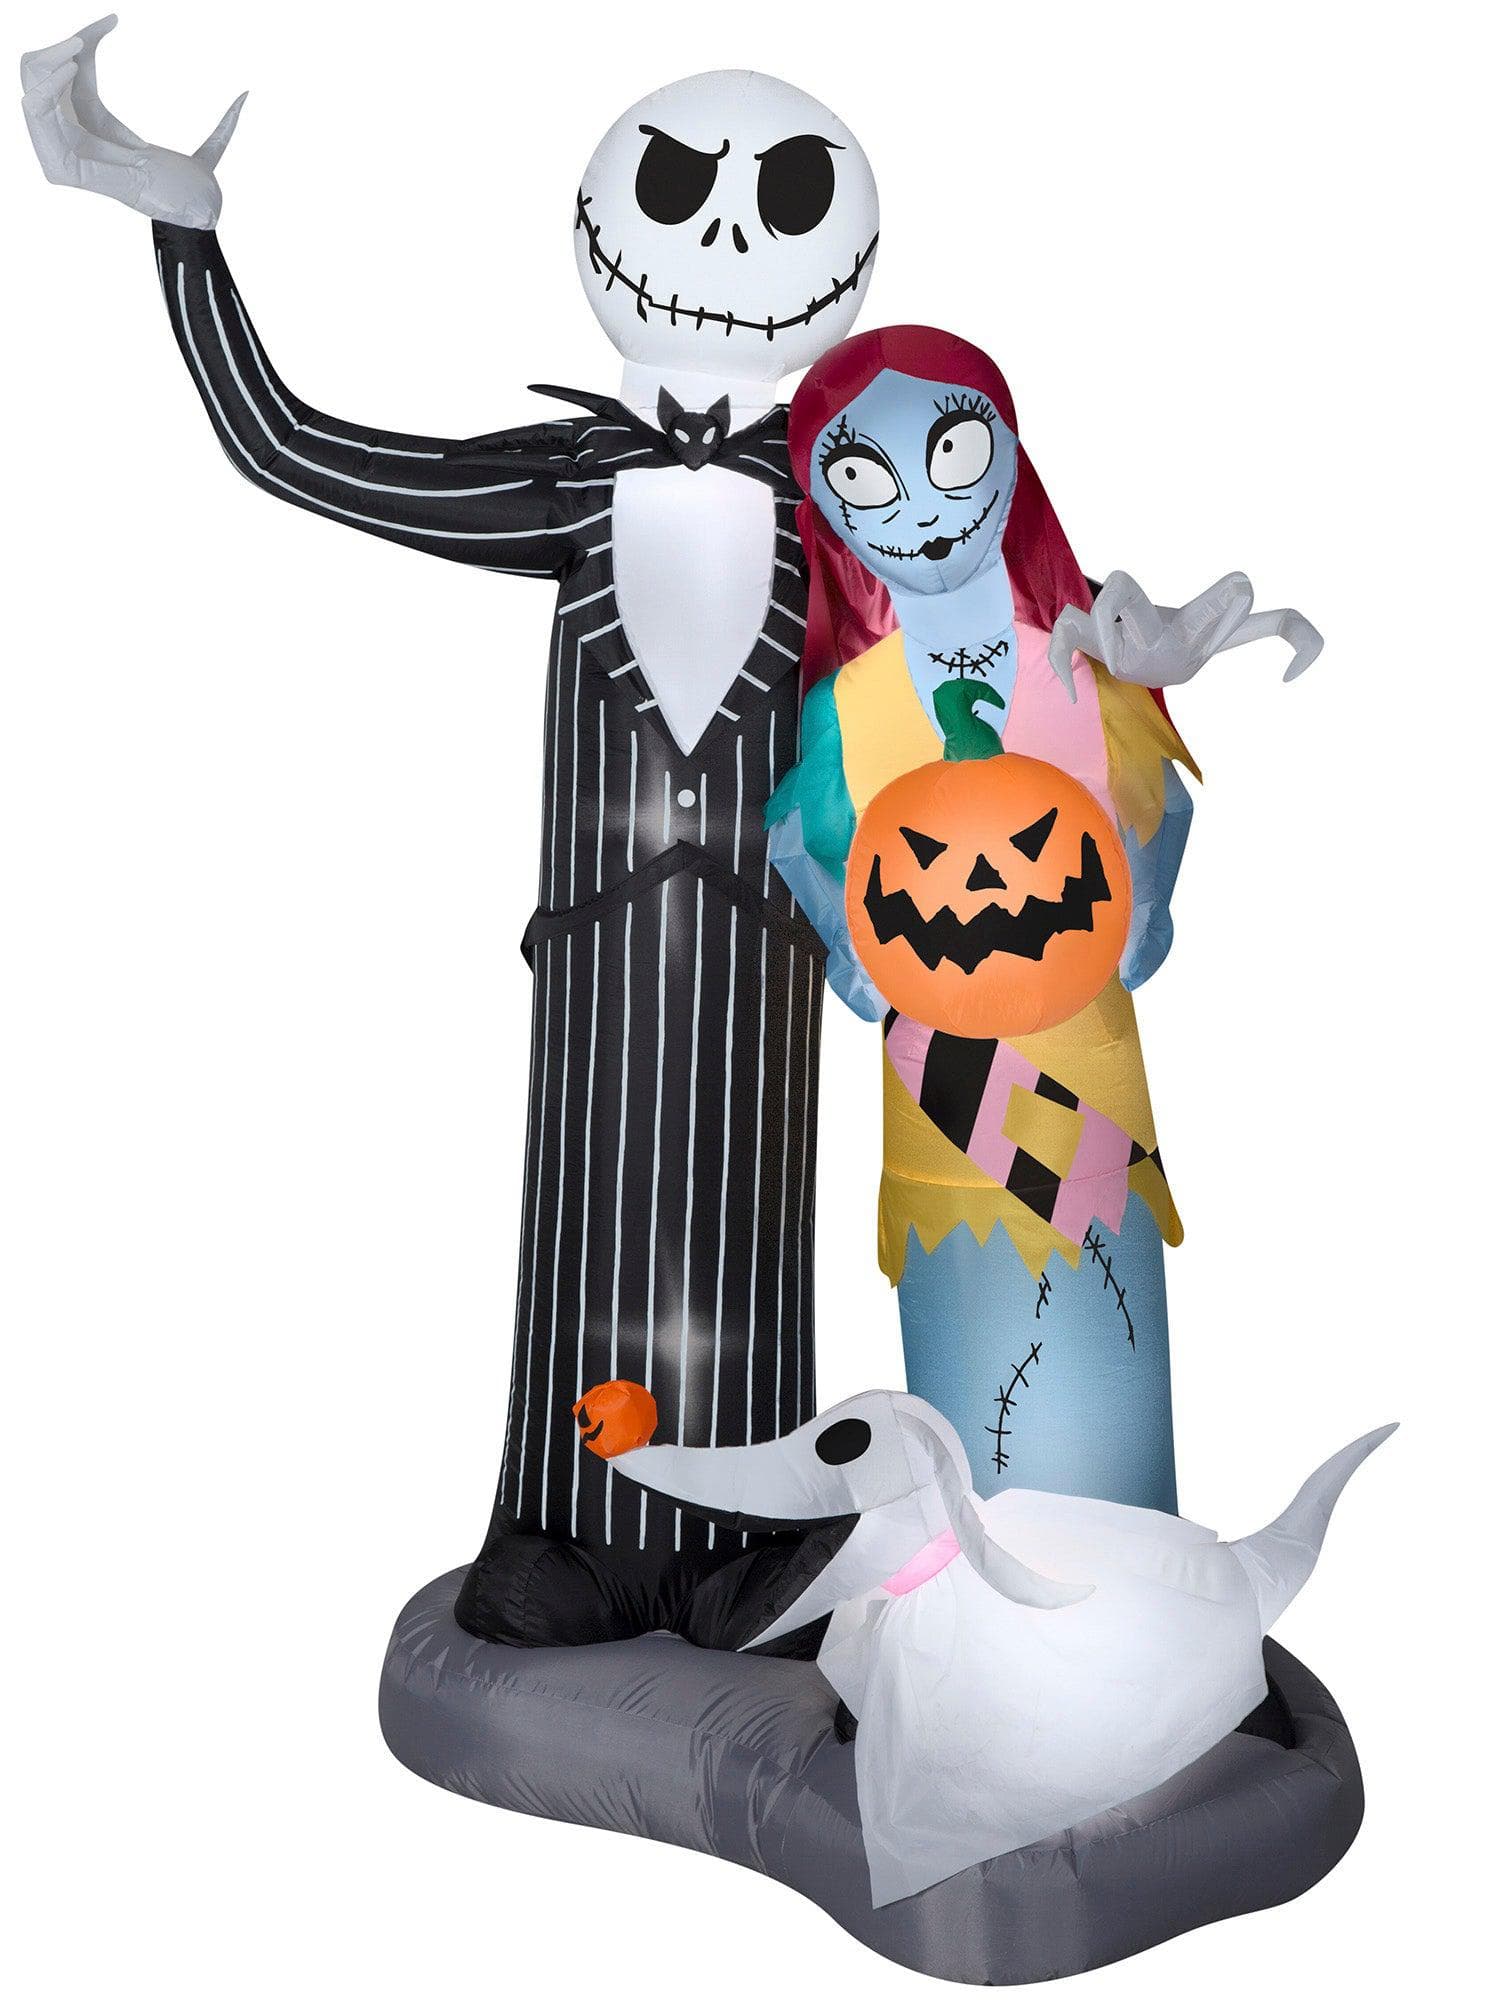 6 Foot he Nightmare Before Christmas Jack & Friends Light Up Halloween Inflatable Lawn Decor - costumes.com